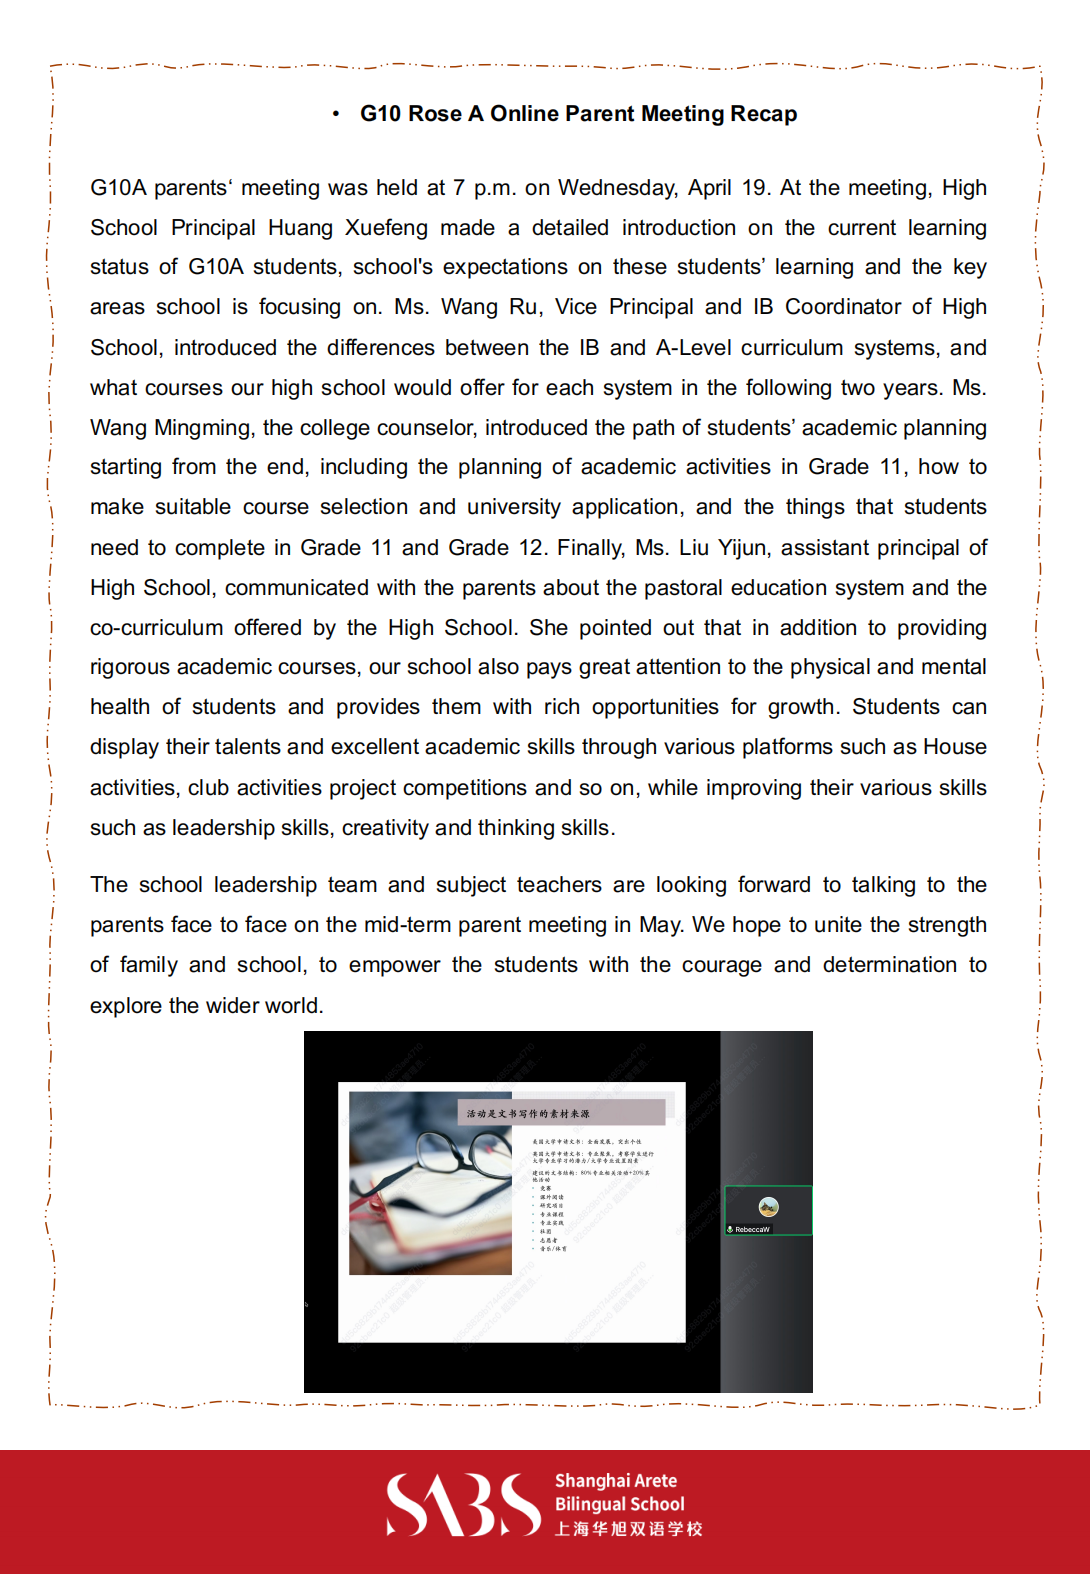 HS 5th Issue Newsletter pptx（English）_06.png